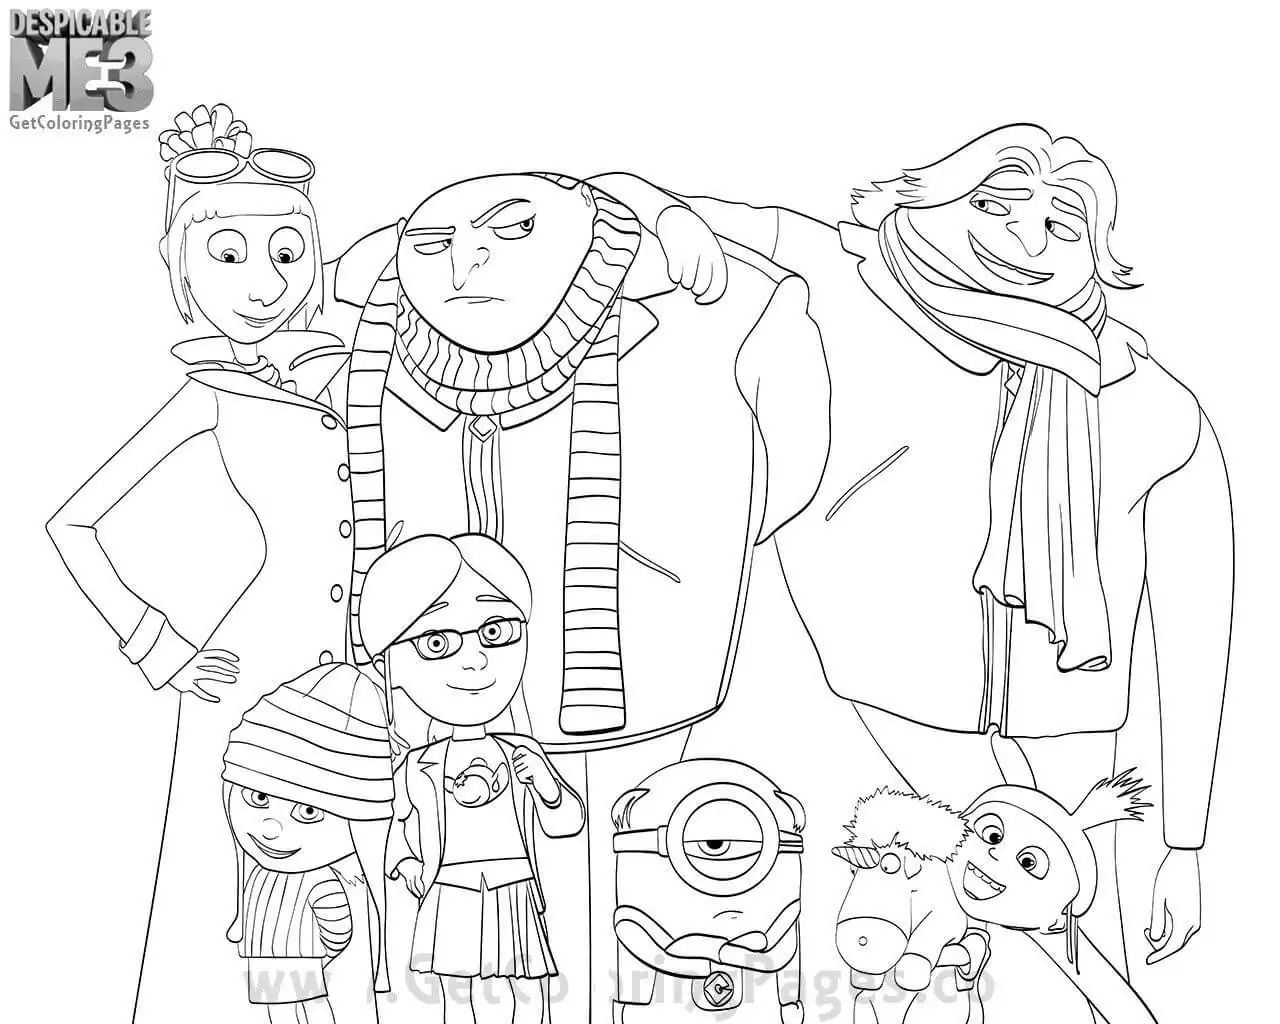 Despicable Me Characters 3